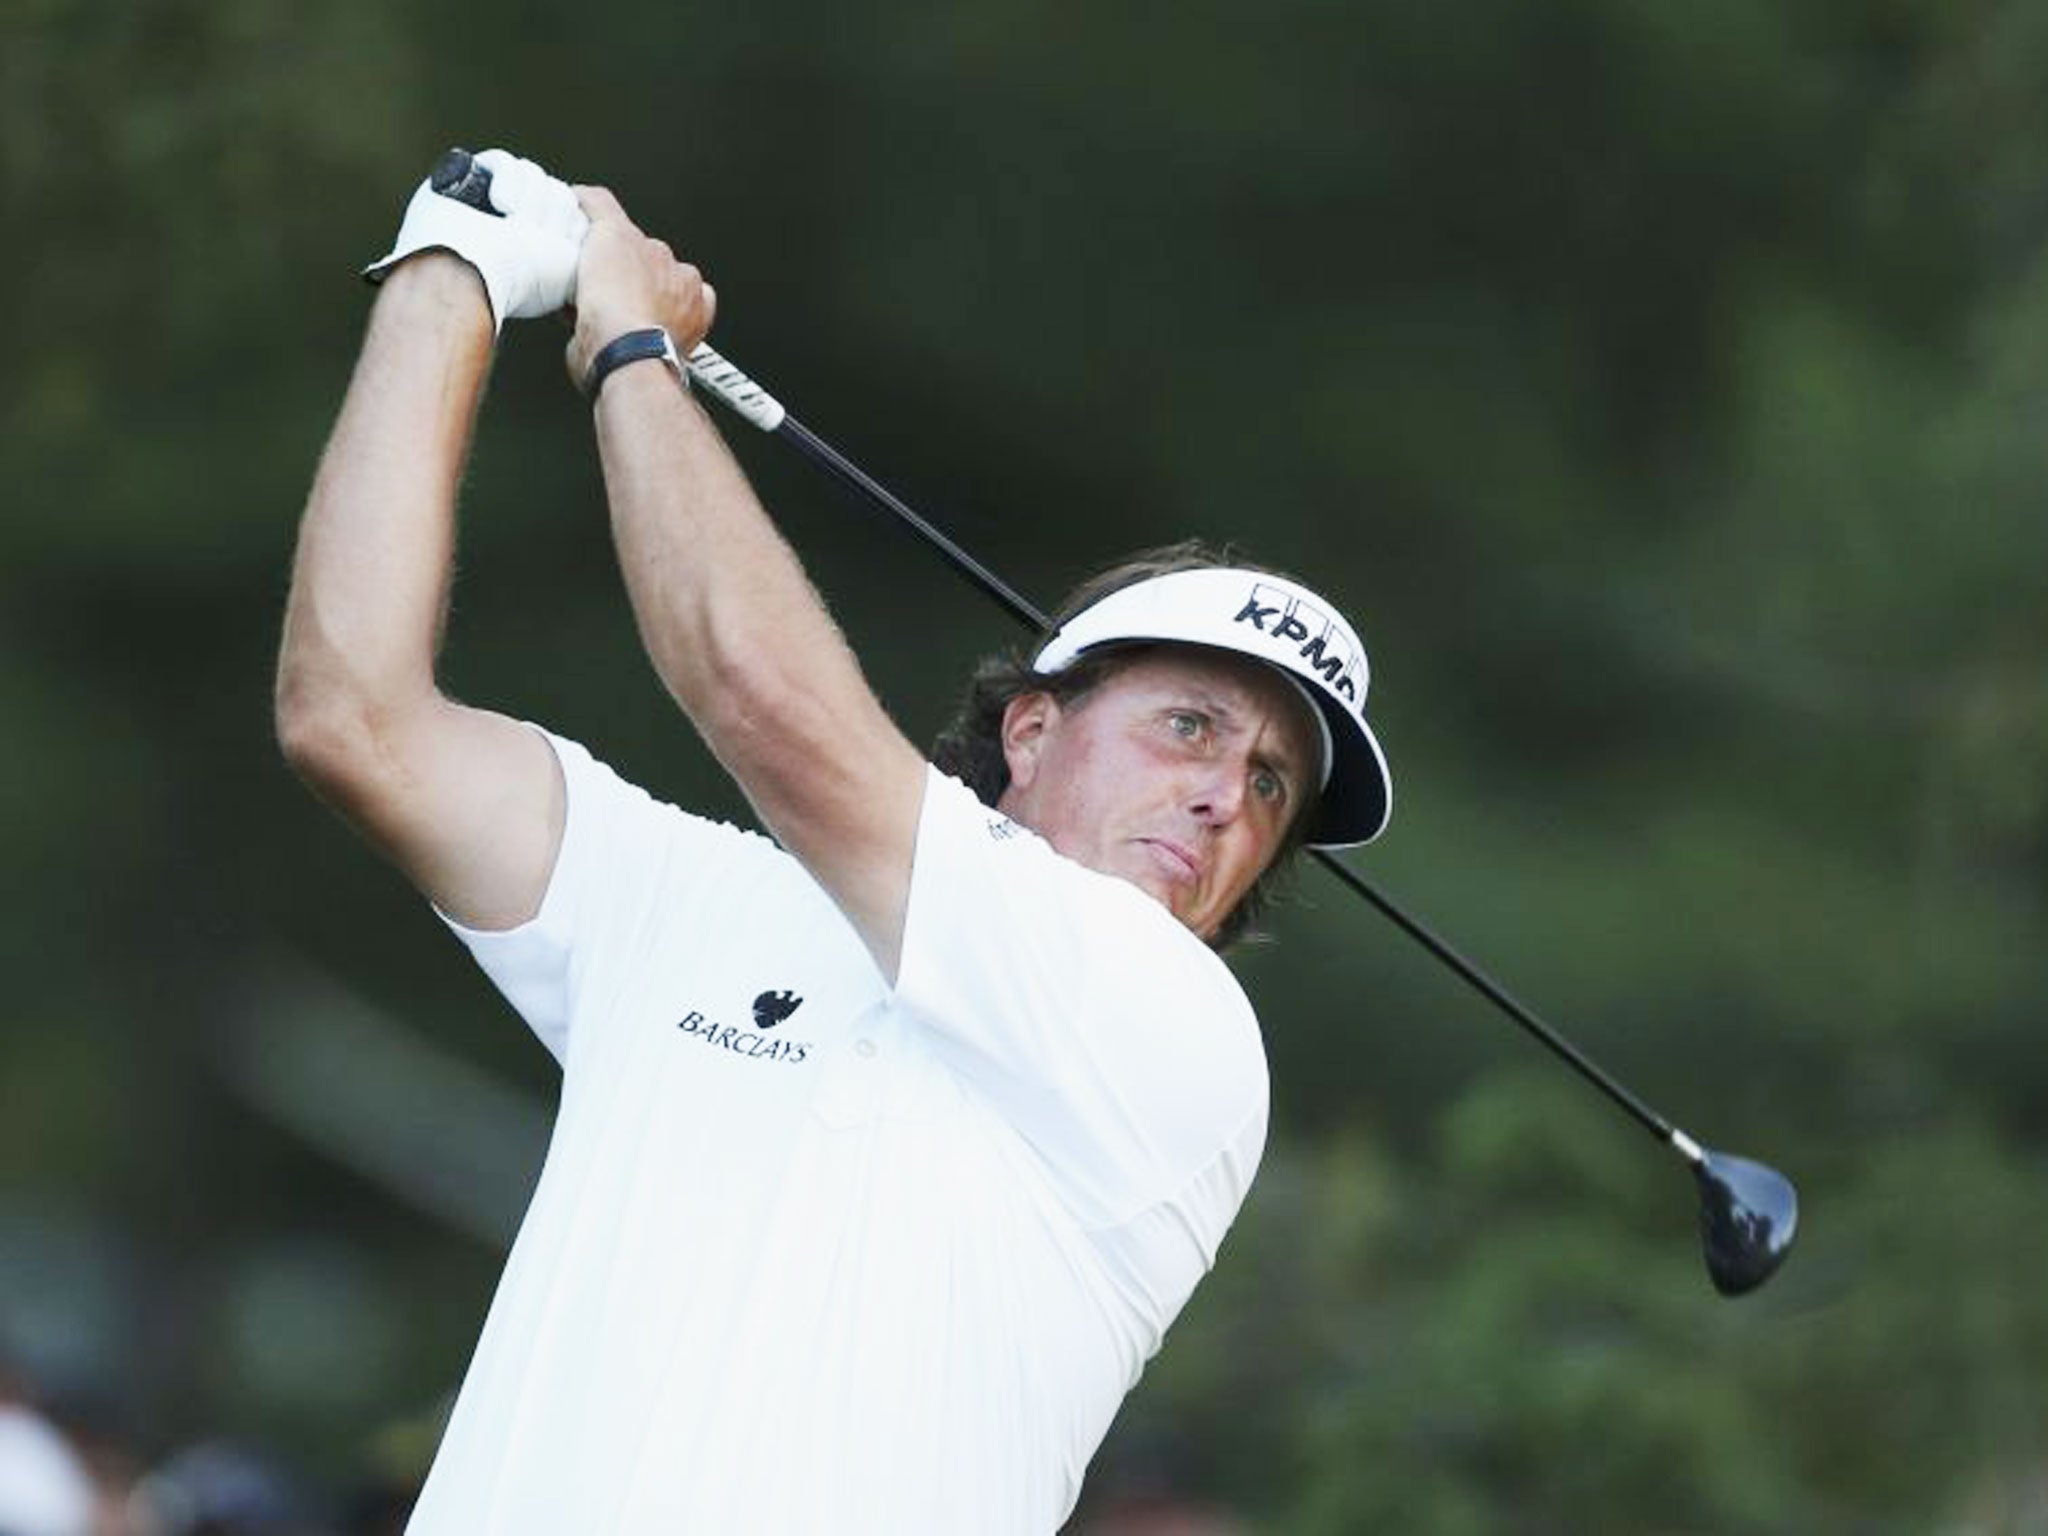 Phil Mickelson tees off on the 16th hole during the second round of the 2013 US Open golf championship at the Merion Golf Club